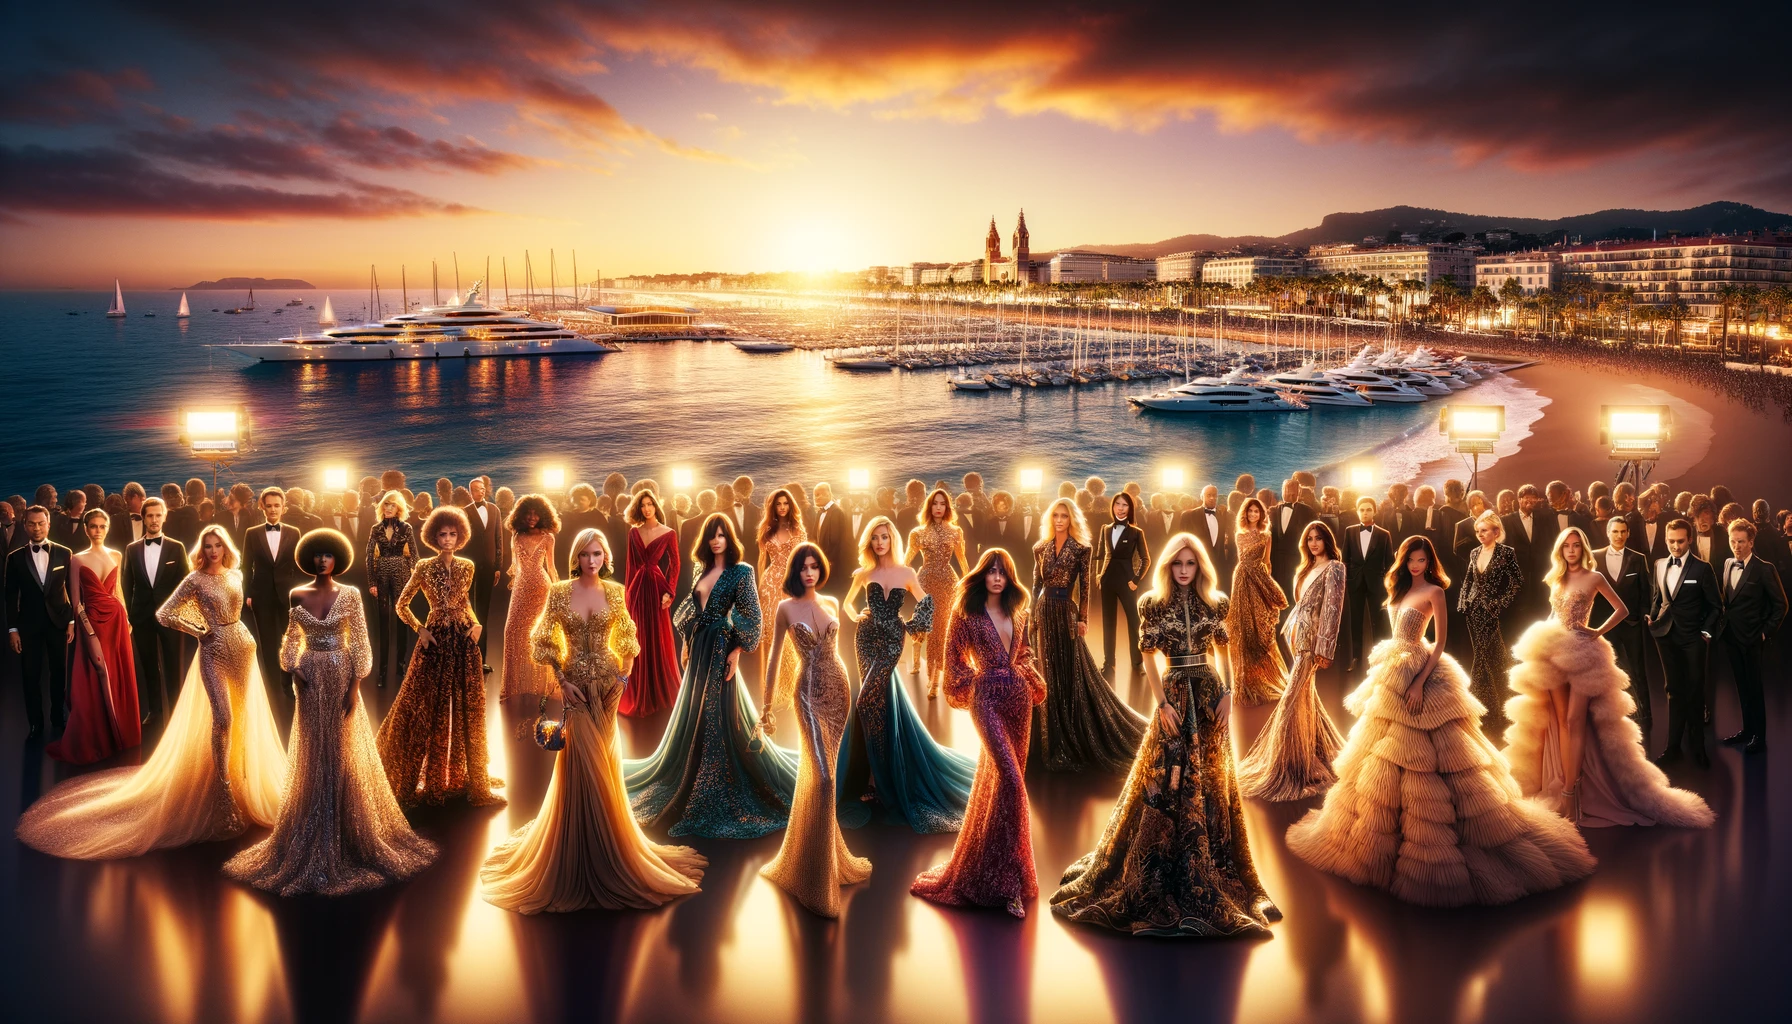 Cannes Film Festival scene featuring Starlettes in haute couture against a golden sunset on the Croisette